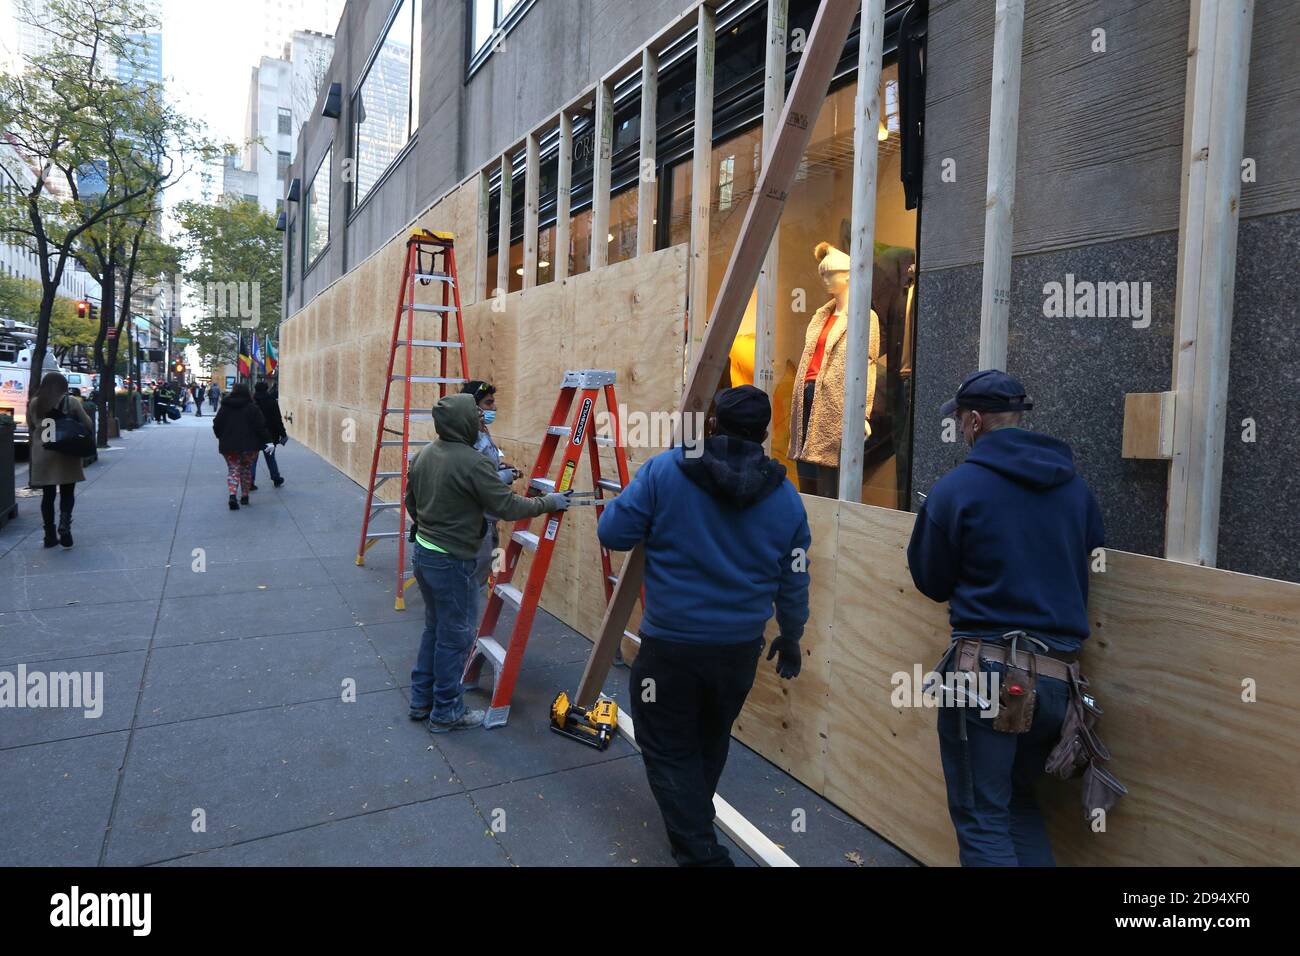 New York, NY, USA. 2nd Nov, 2020. Nov 2, 2020 : New York Stores prepare for possible unrest surrounding election day. The J Crew Store at Rockefeller Center is boarded up, Credit: Dan Herrick/ZUMA Wire/Alamy Live News Stock Photo